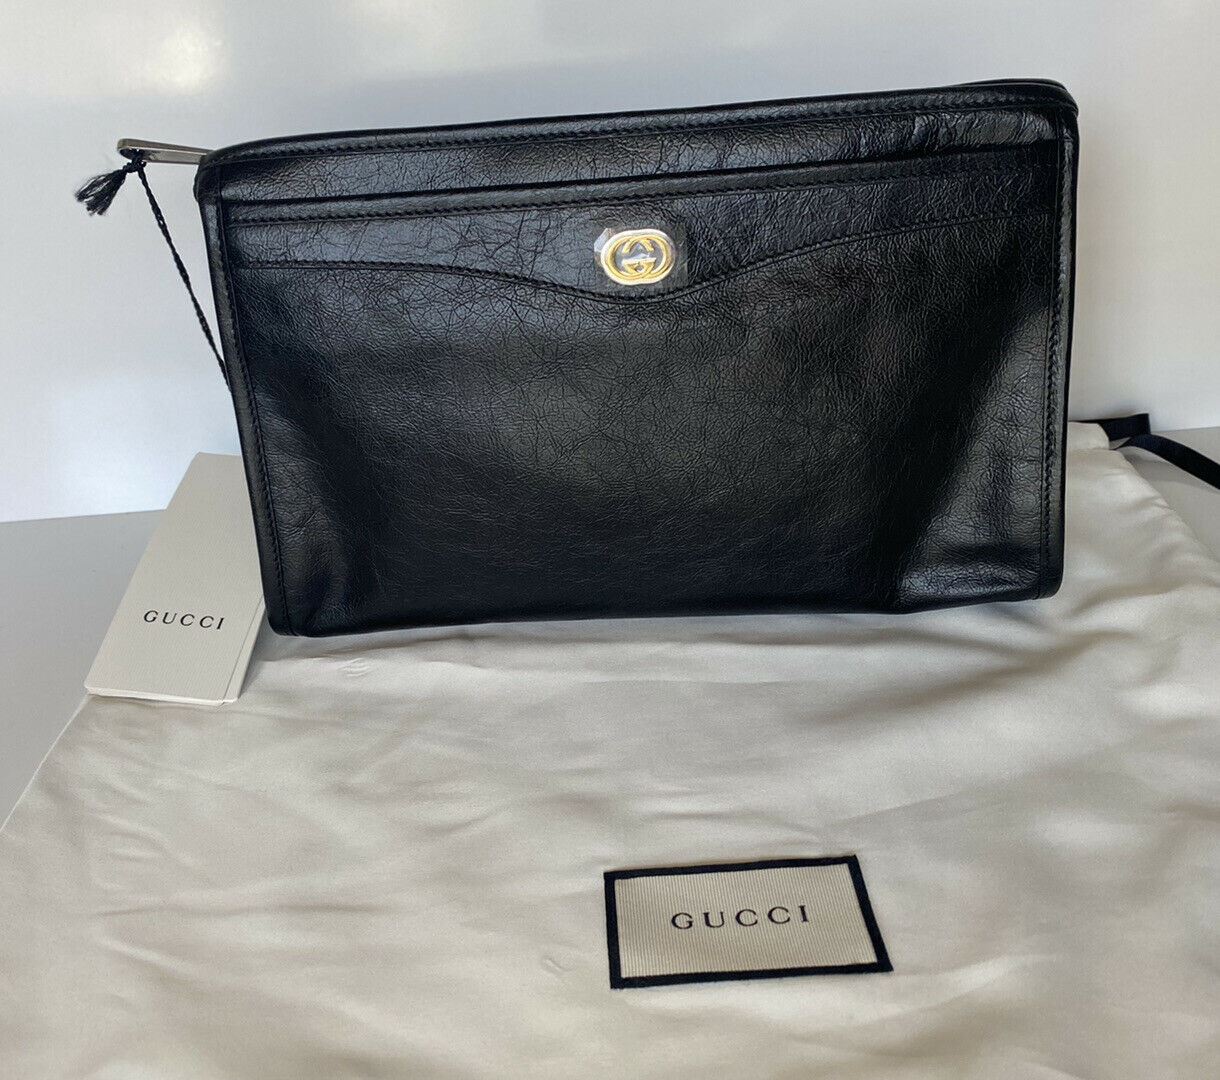 NWT Gucci Morpheus Косметичка Gucci Code Embossed Pouch, черная кожа 575991 